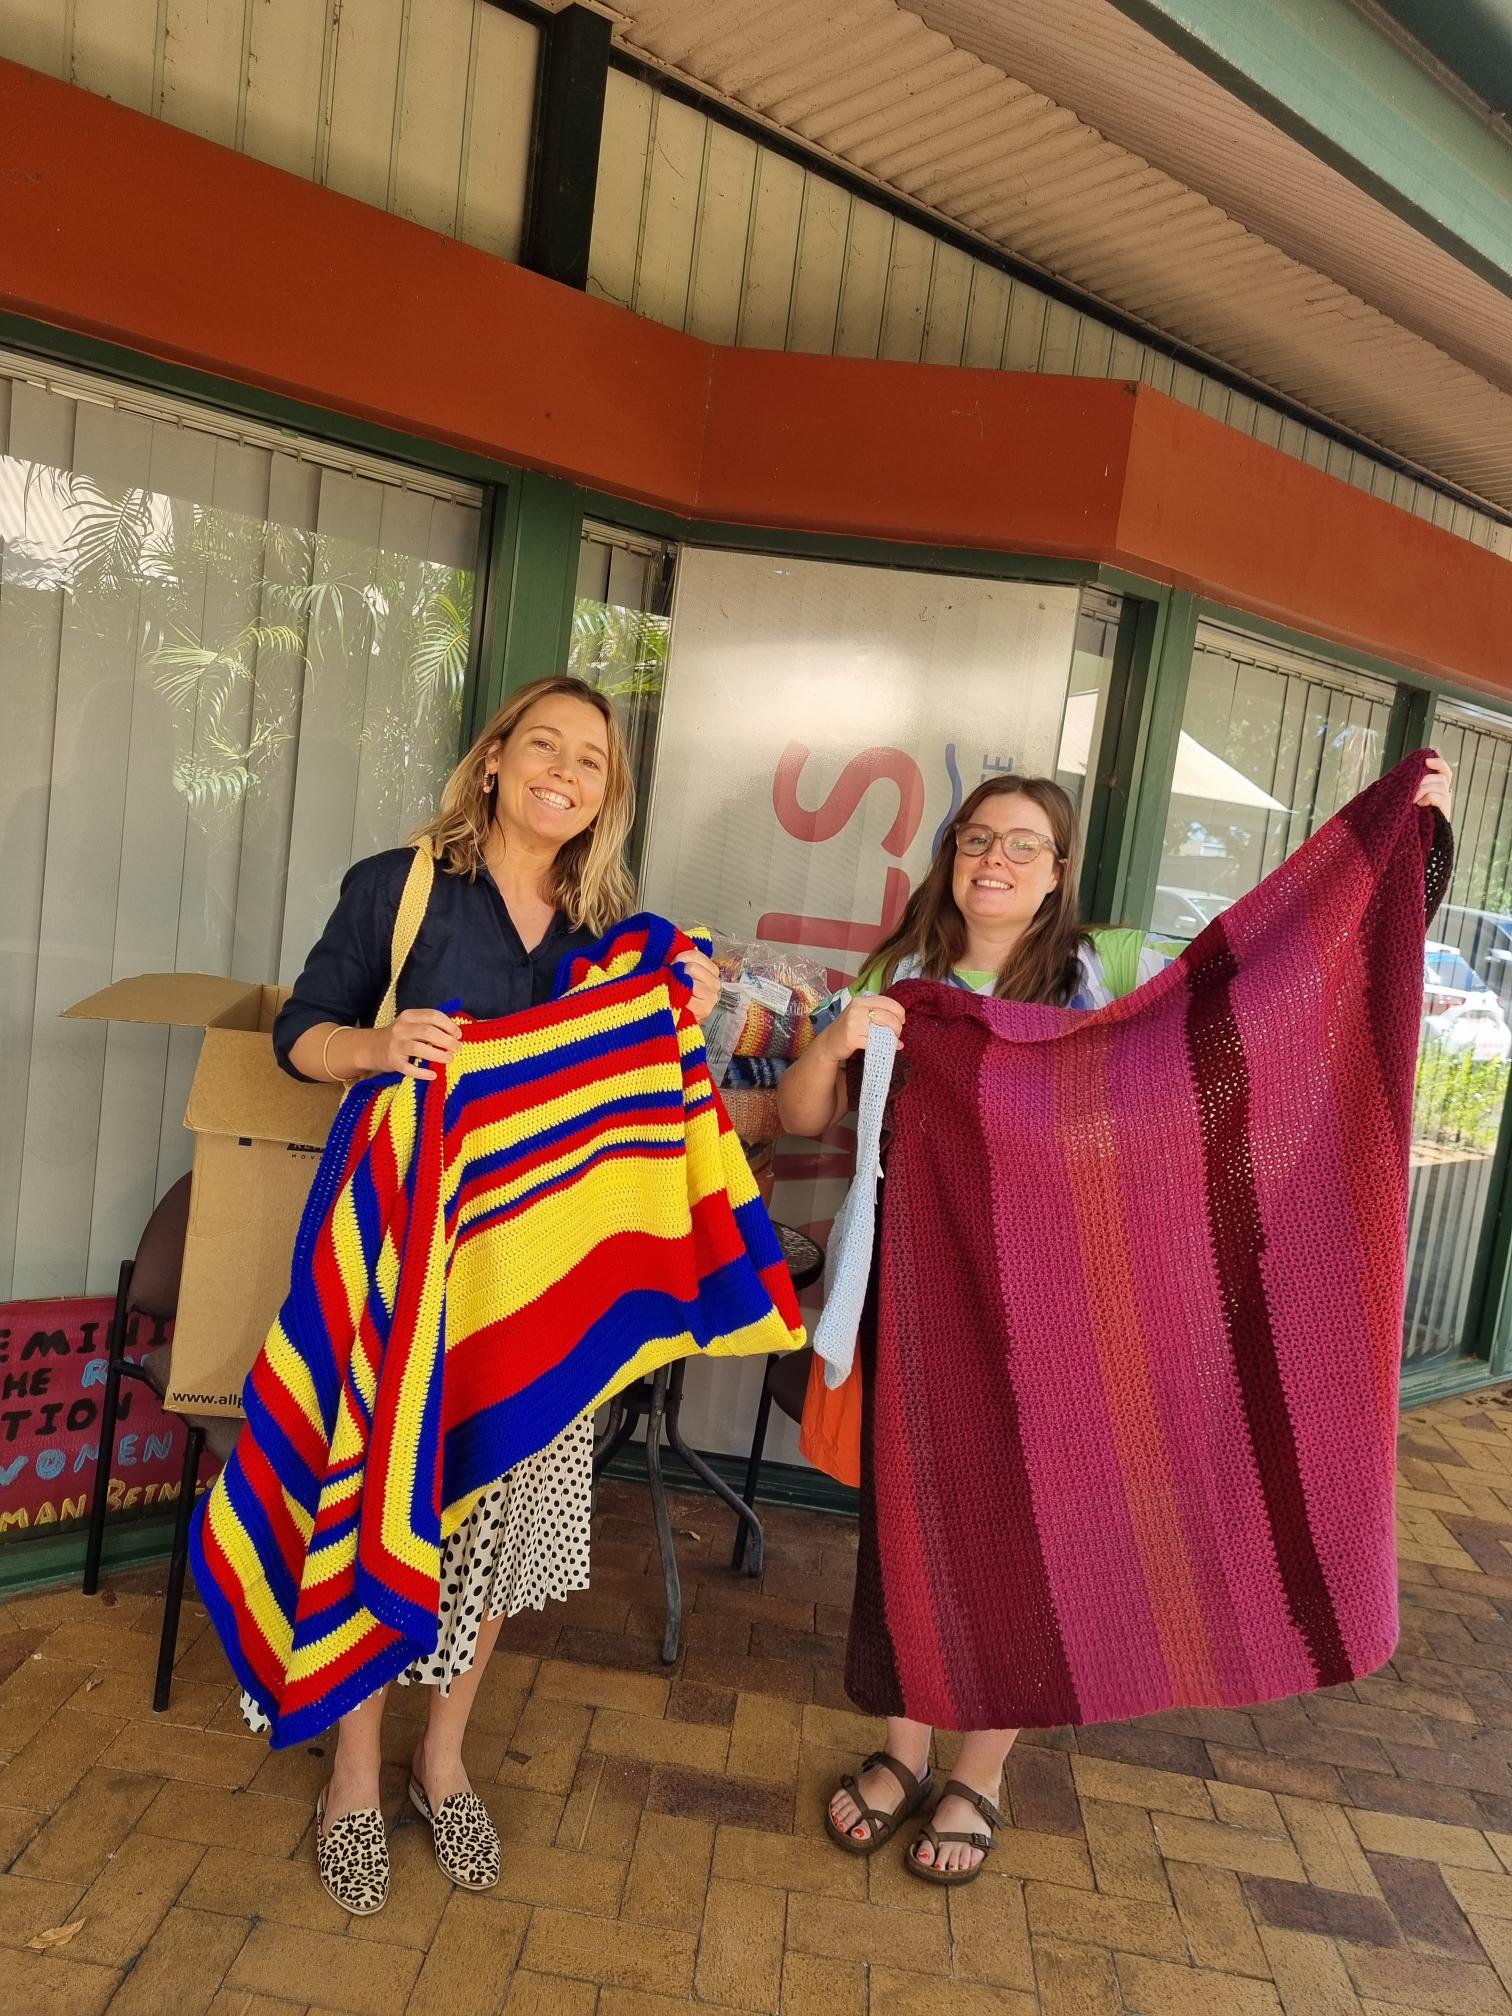 Knit4Charities volunteers with handmade blankets for donation